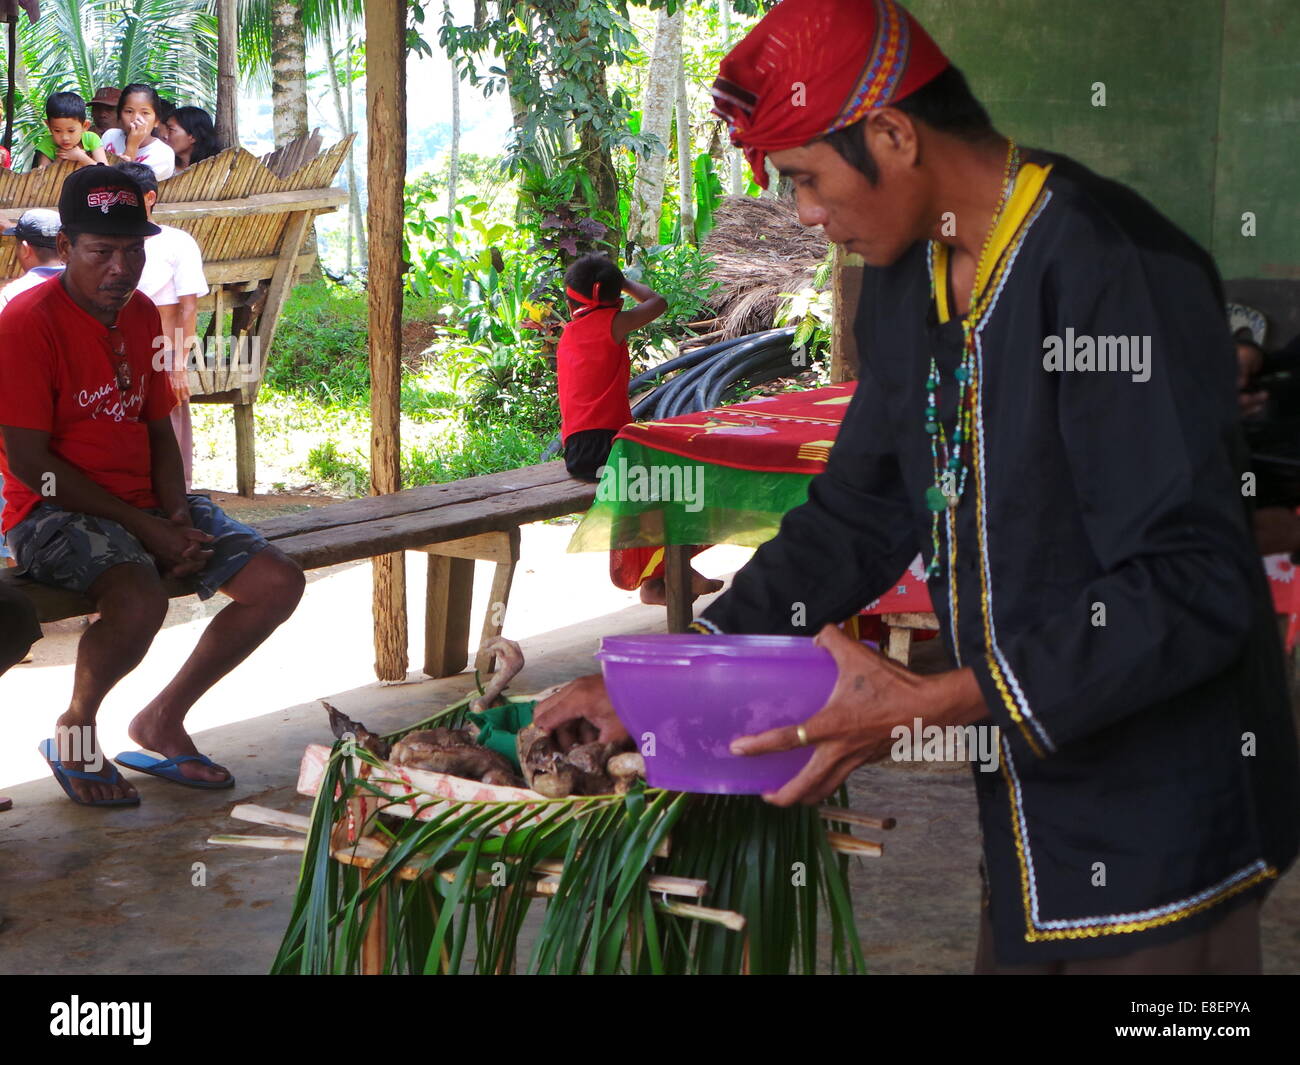 A Subanen elder performing a ritual. Subanen is one of the endangered tribes in Mindanao. Dumingag town in Zamboanga del Sur province in the island of Mindanao is adhering in preserving the cultures and traditions of their town, as a matter of fact during town fiestas, pop dance are prohibited and traditional songs and dances are promoted to alleviate their cultural pride. © Sherbien Dacalanio/Pacific Press/Alamy Live News Stock Photo